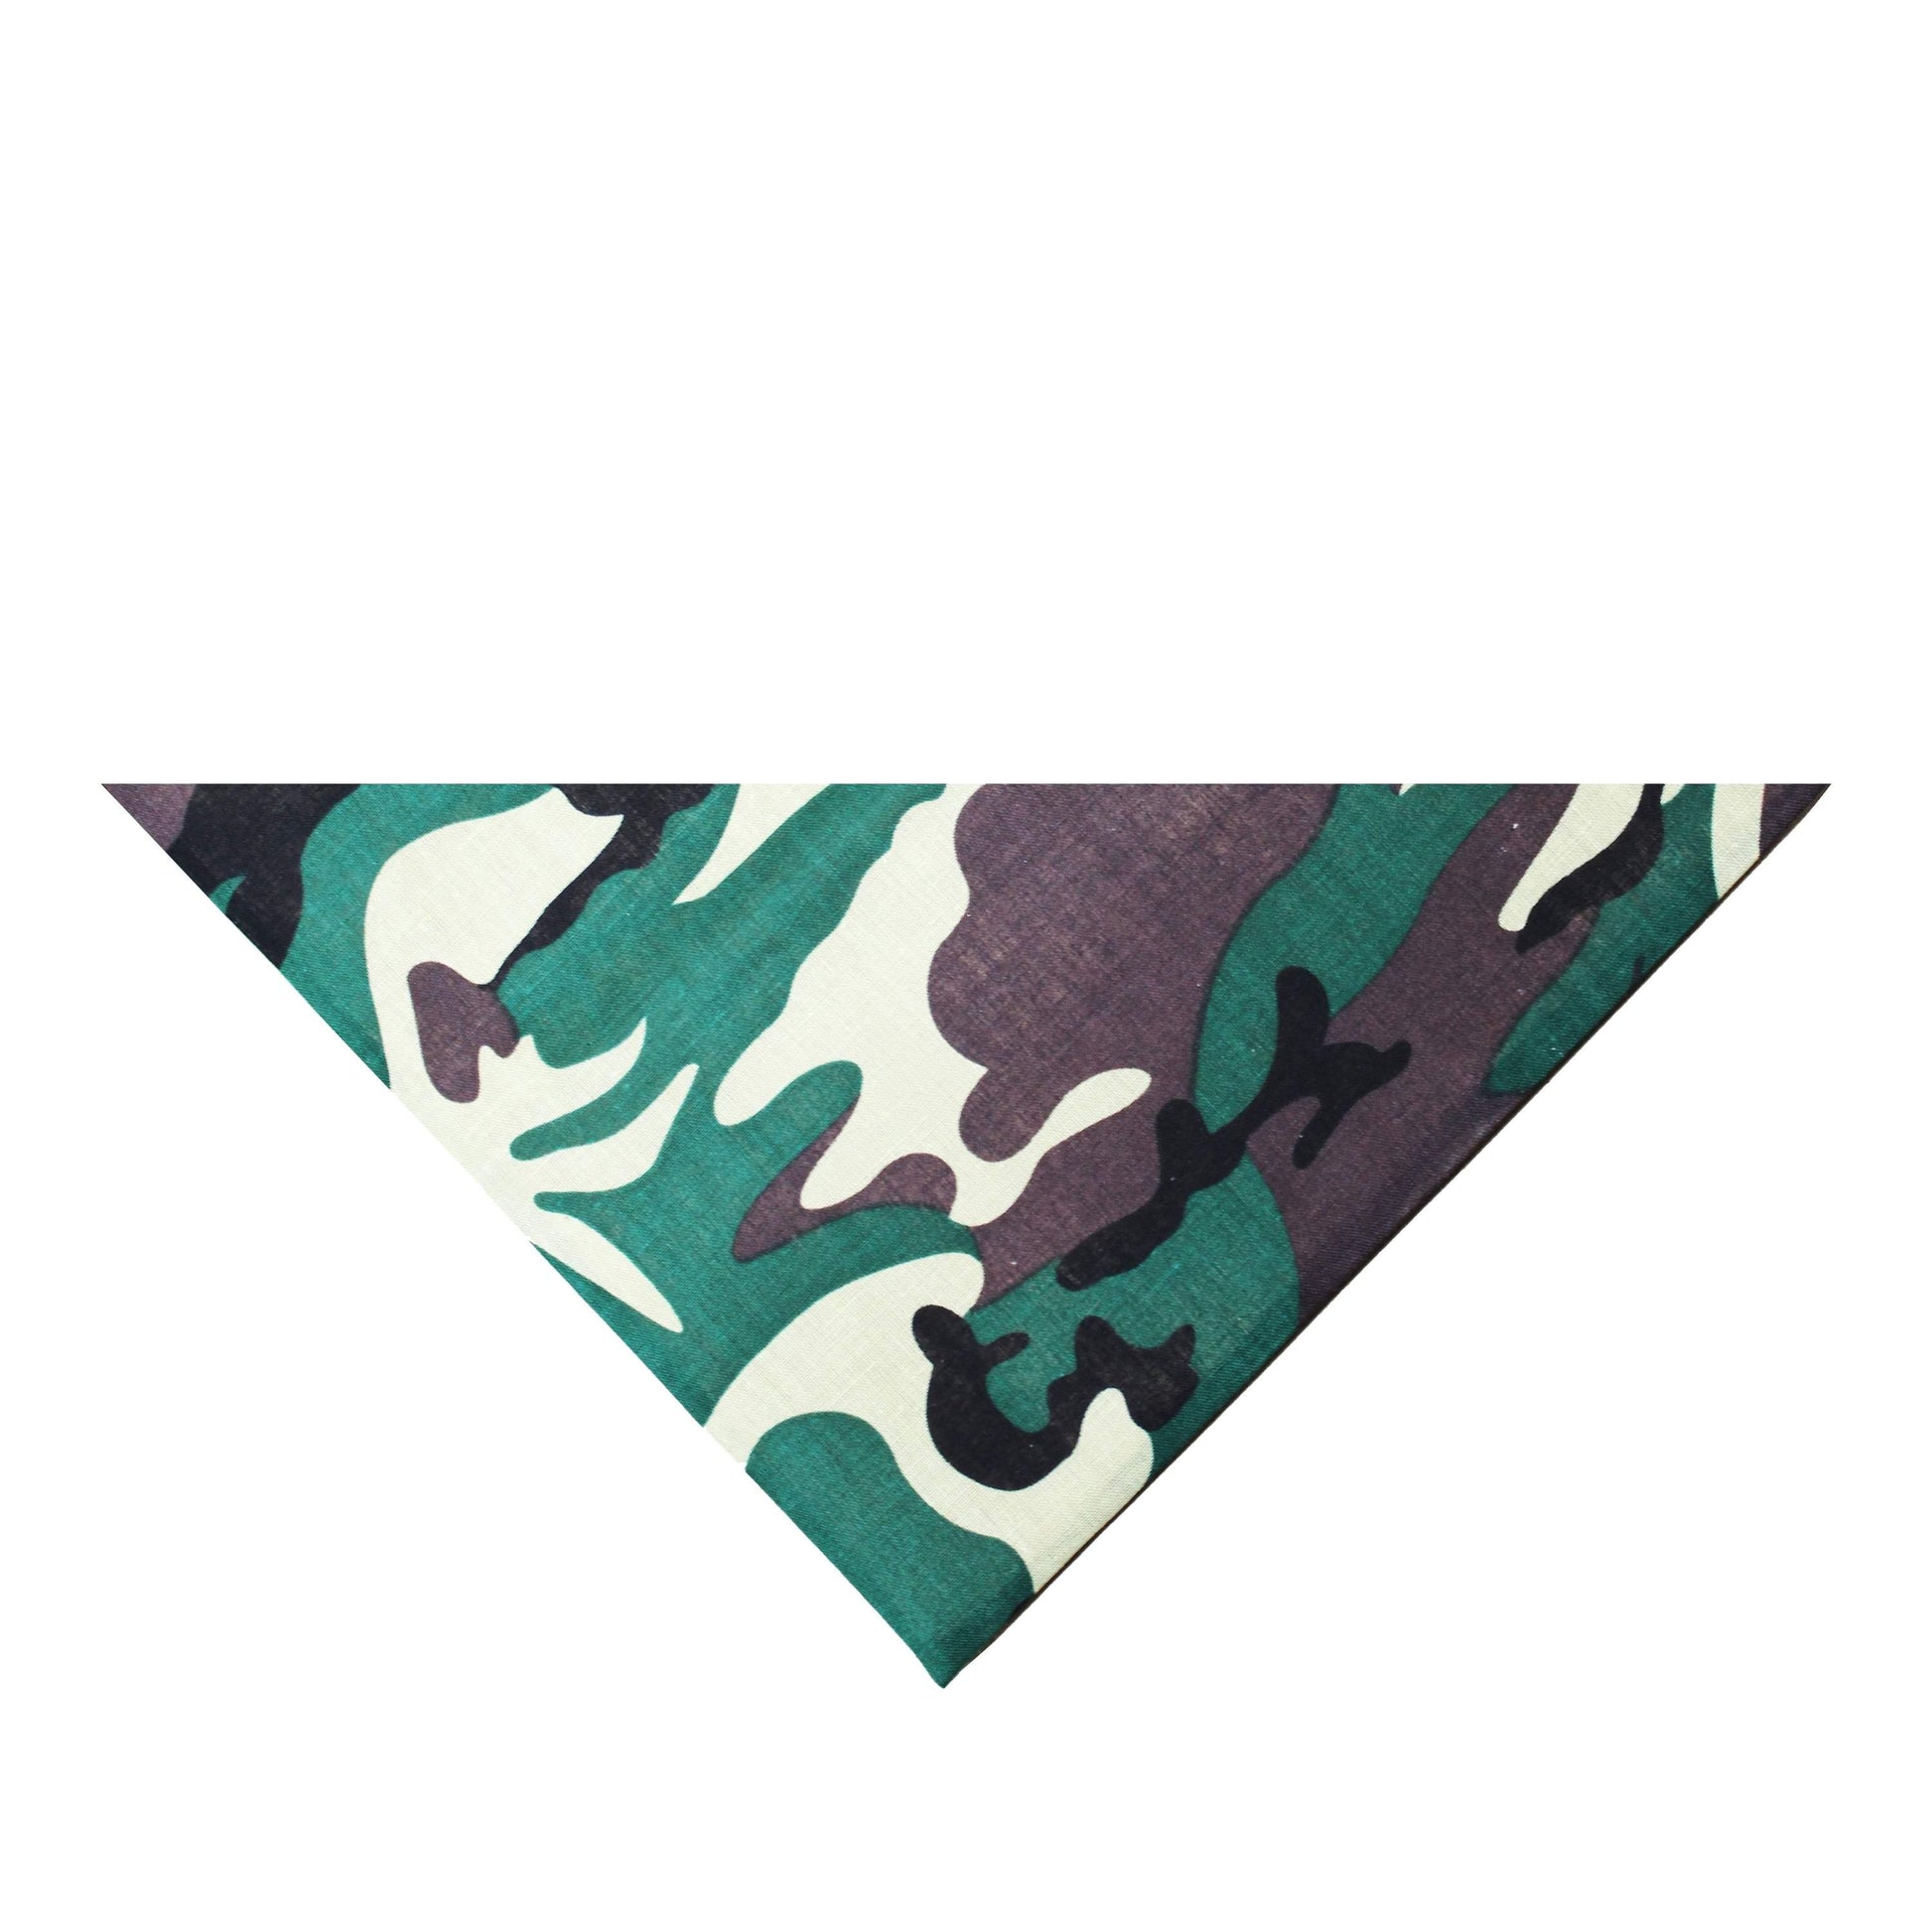 Pack of 9 Triangle Cotton Bandanas - Solid Colors and Polyester - 30 in x 20 in x 20 in